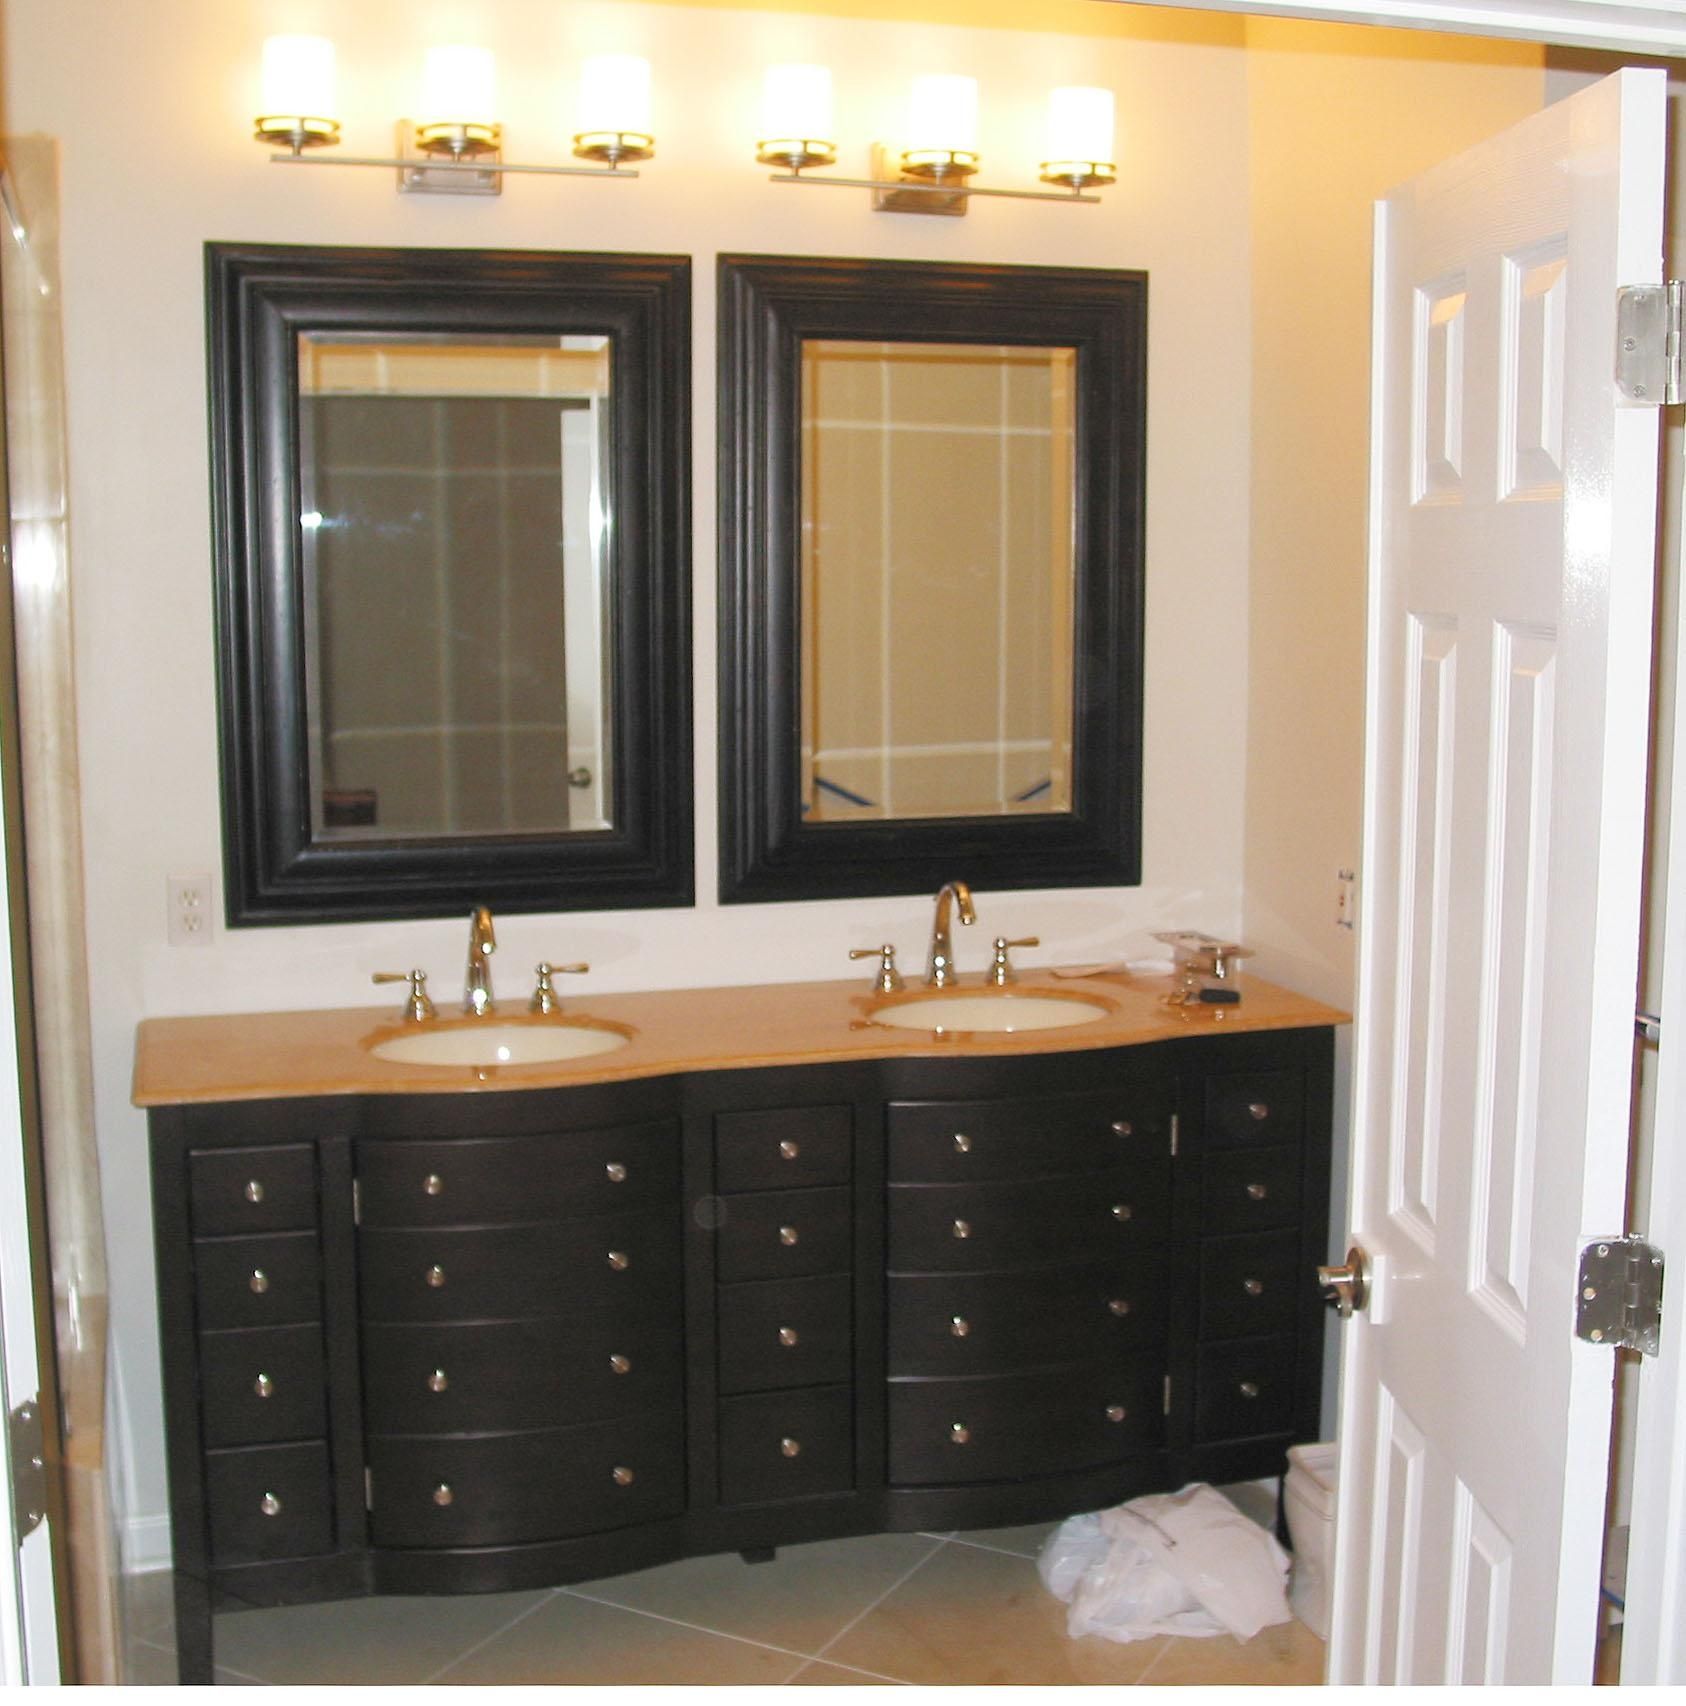 Vanity Mirror For Bathroom With Bathroom Mirror Ideas : Bathroom Inside Small Bathroom Vanity Mirrors (View 6 of 20)